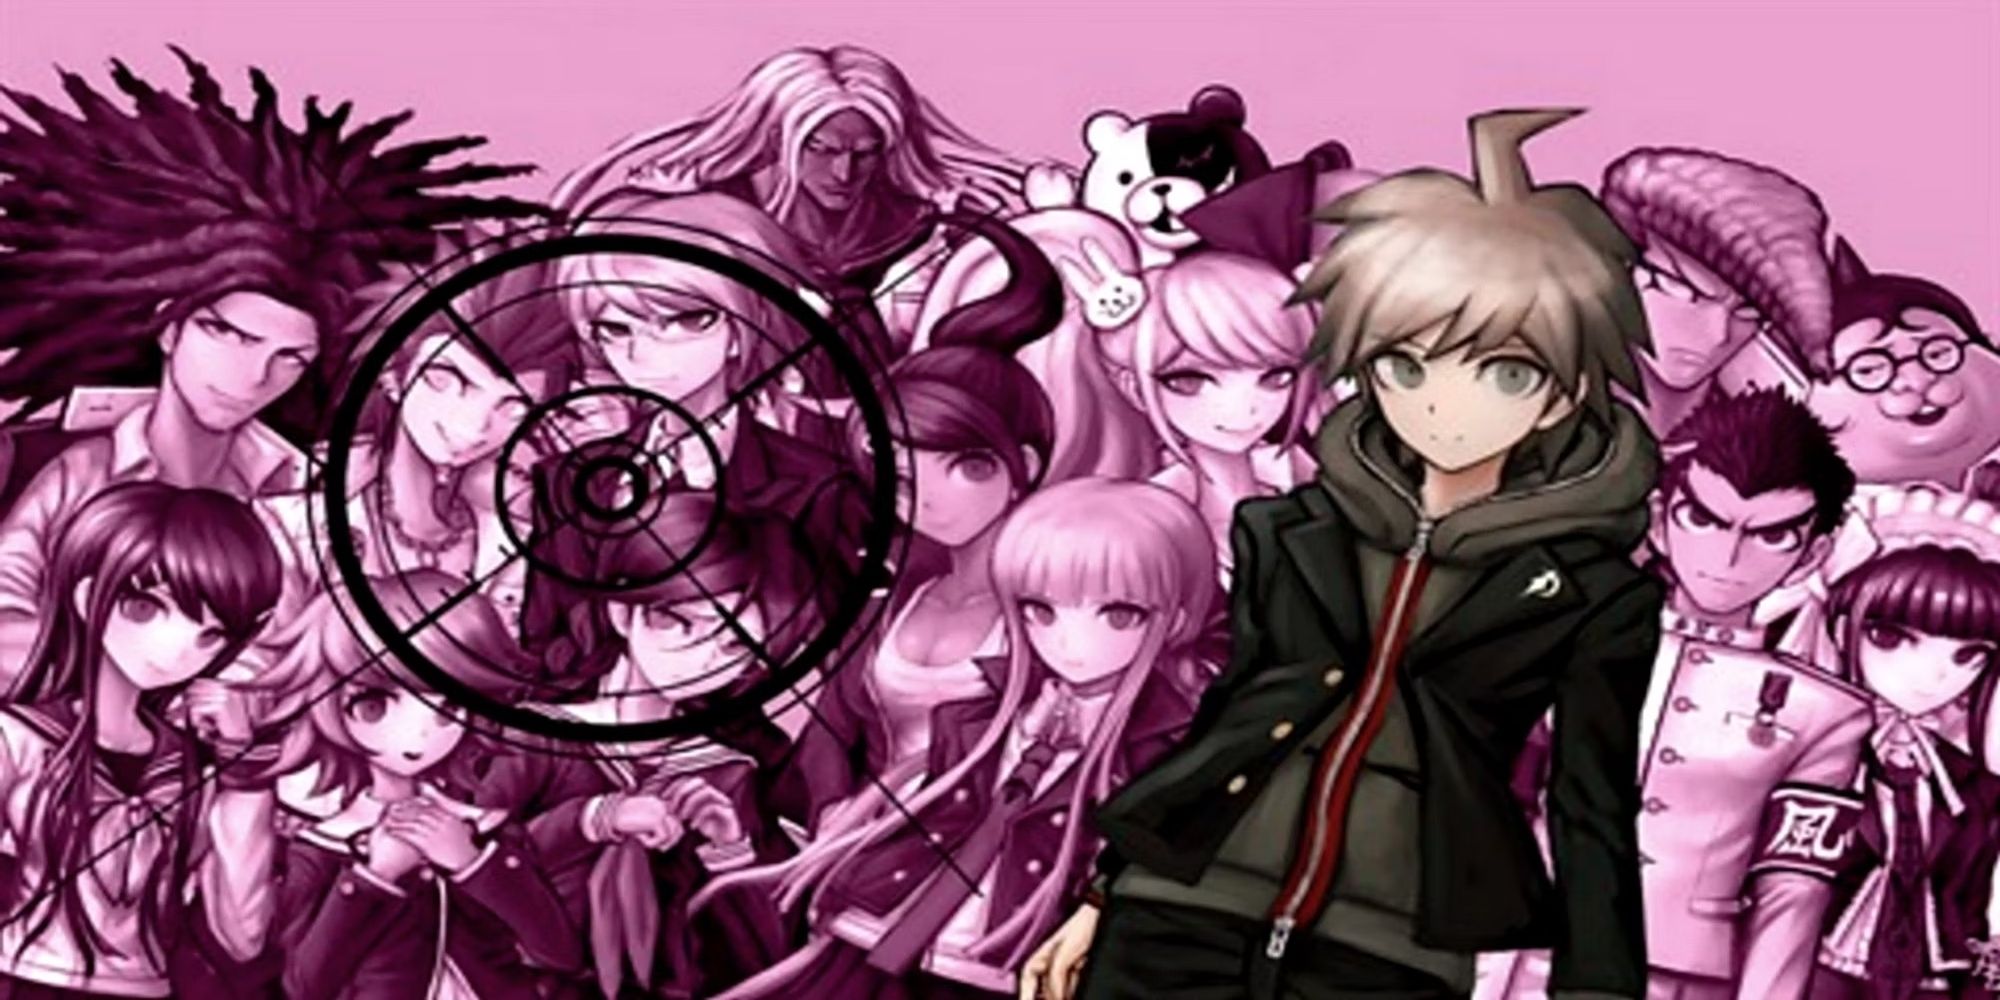 The characters on a pink background.